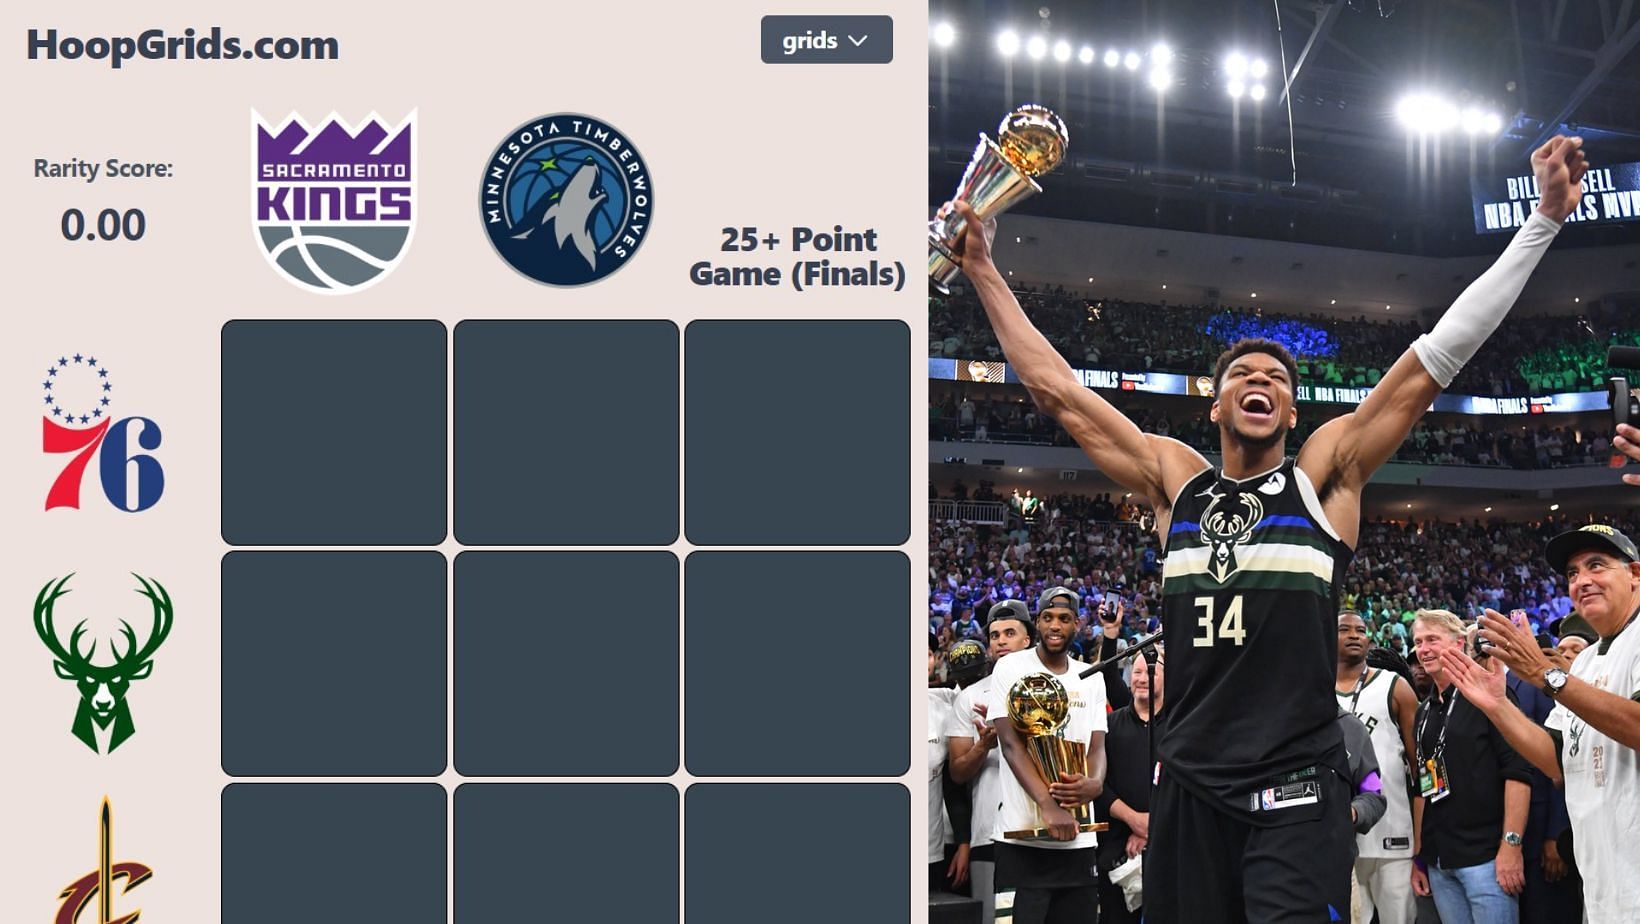 Which Bucks and Cavs stars have scored more than 25 points in the Finals? NBA HoopGrids answers for July 27